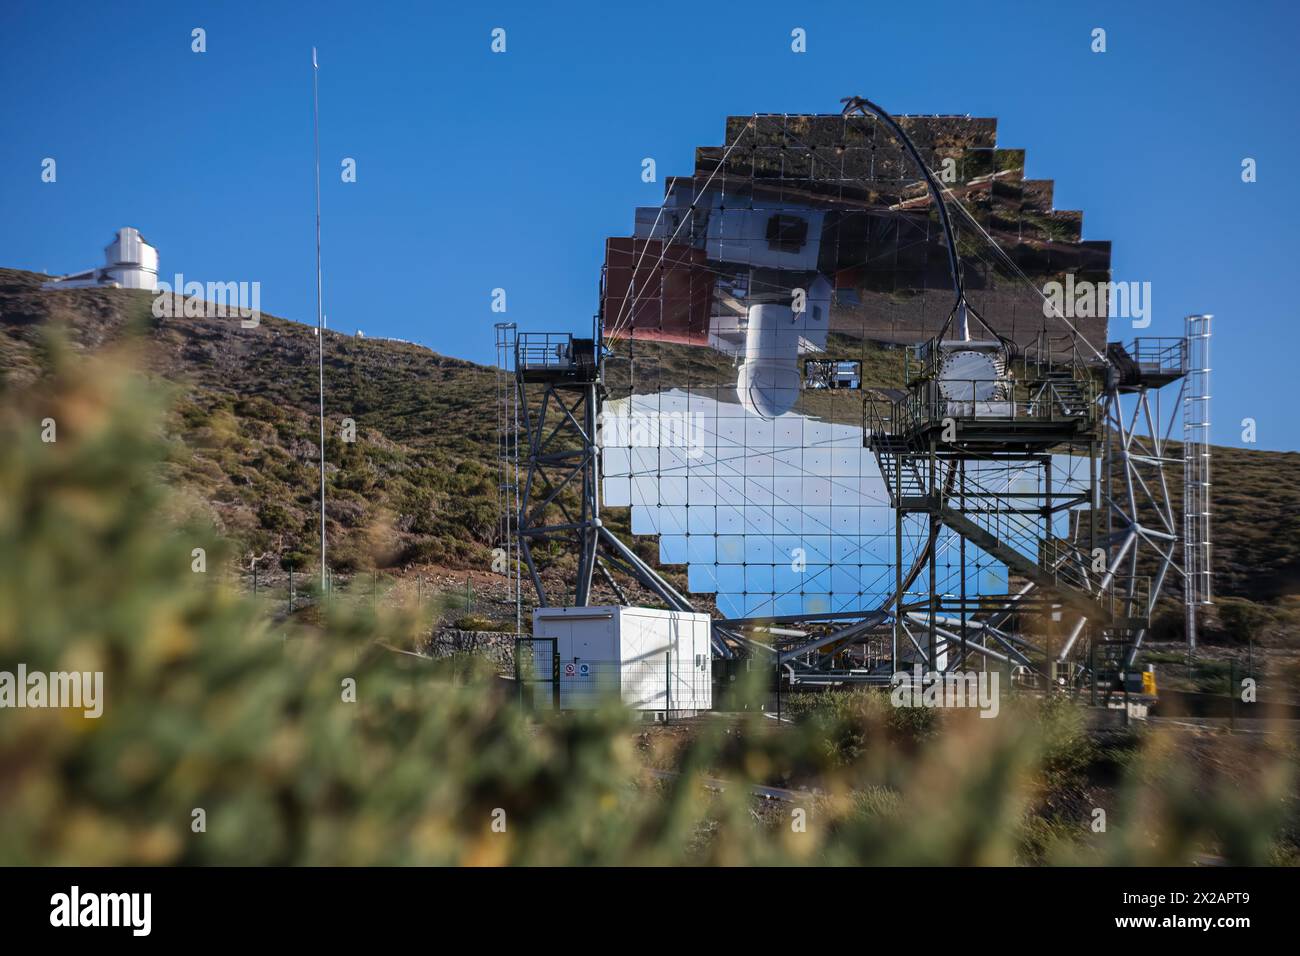 Tsherenkov Telescope at the Roque de los Muchachos Observatory, Canary Islands Stock Photo